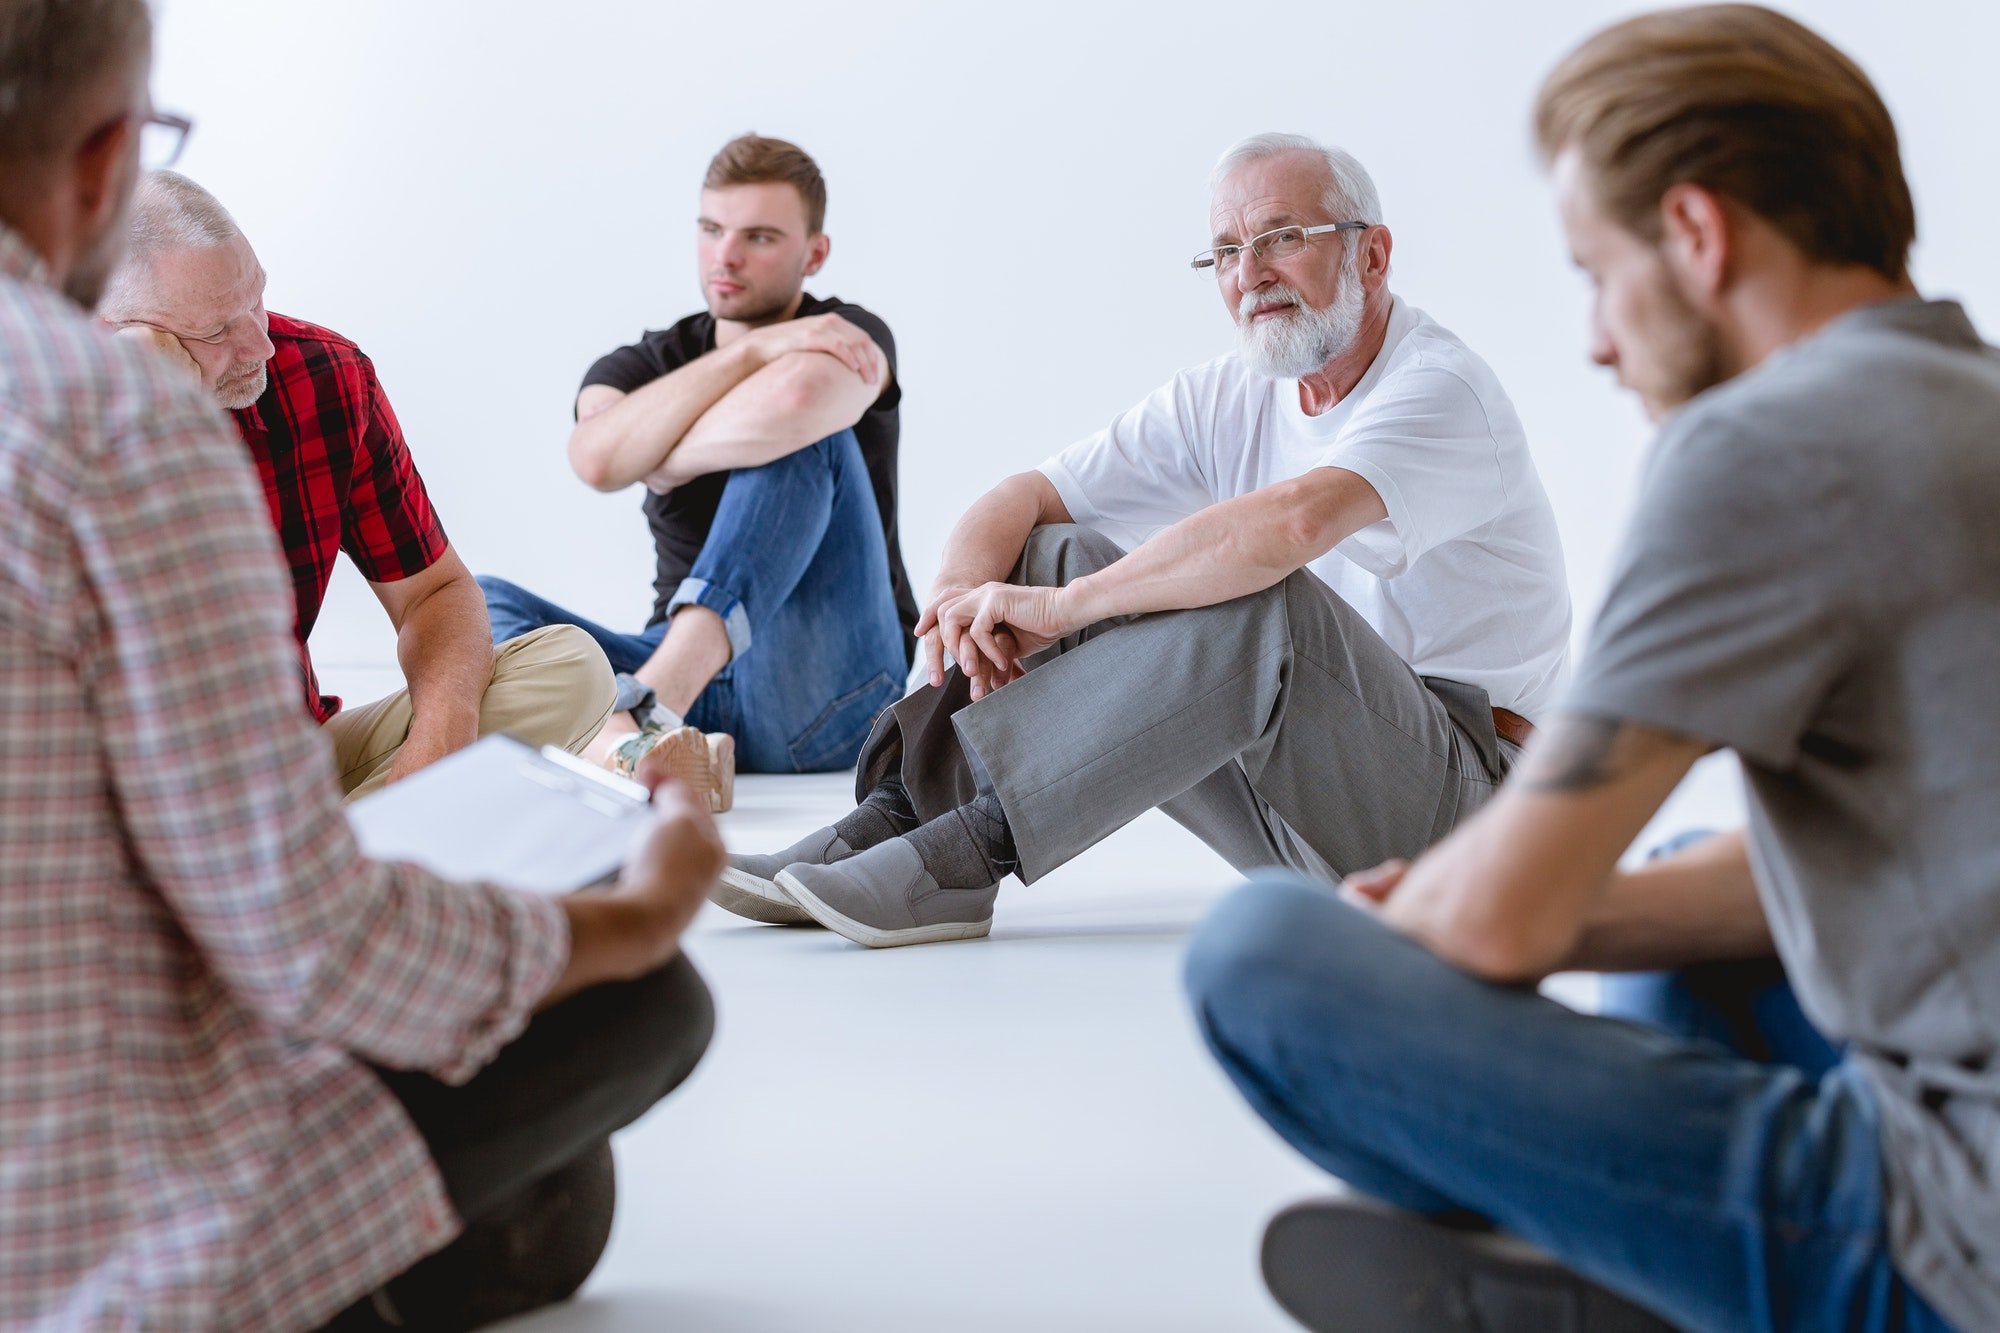 During group psychotherapy men discover their hopes, fears, losses, frustrations, and traumas